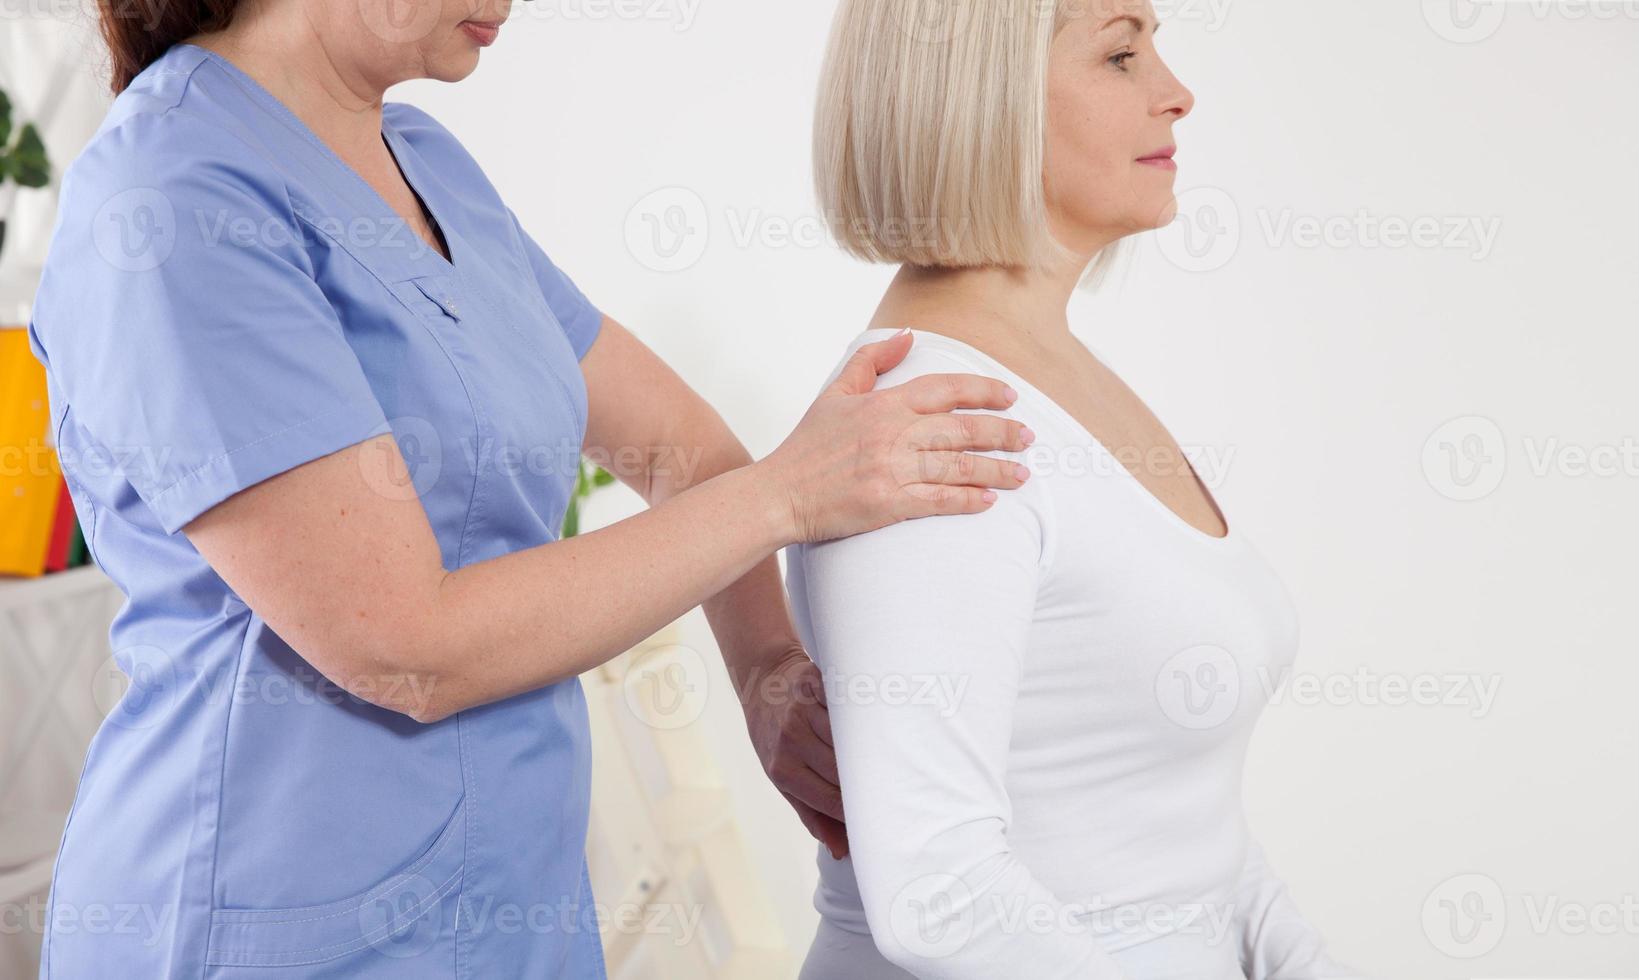 Physiotherapy, sport injury rehabilitation treatment. Woman having chiropractic back adjustment. Osteopathy, Alternative medicine, pain relief concept. photo